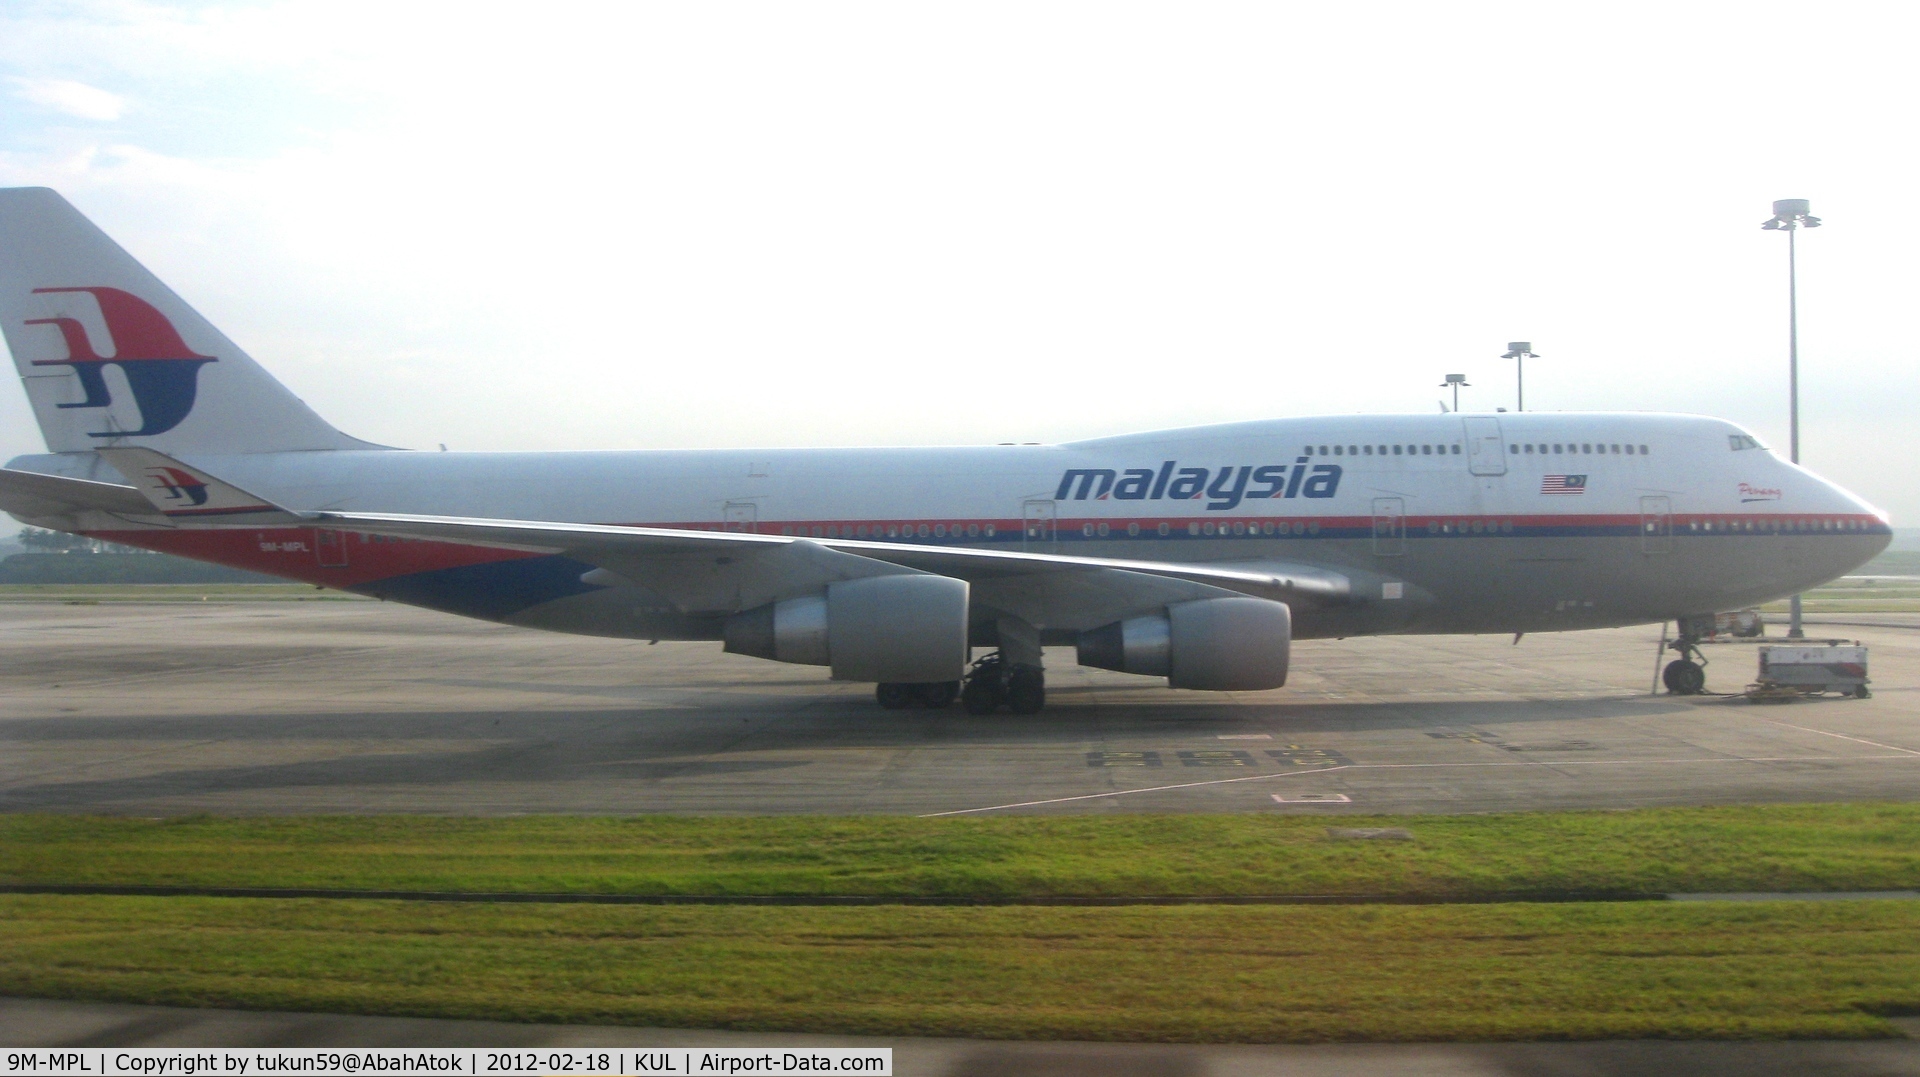 9M-MPL, 1998 Boeing 747-4H6 C/N 28428, Malaysia Airlines